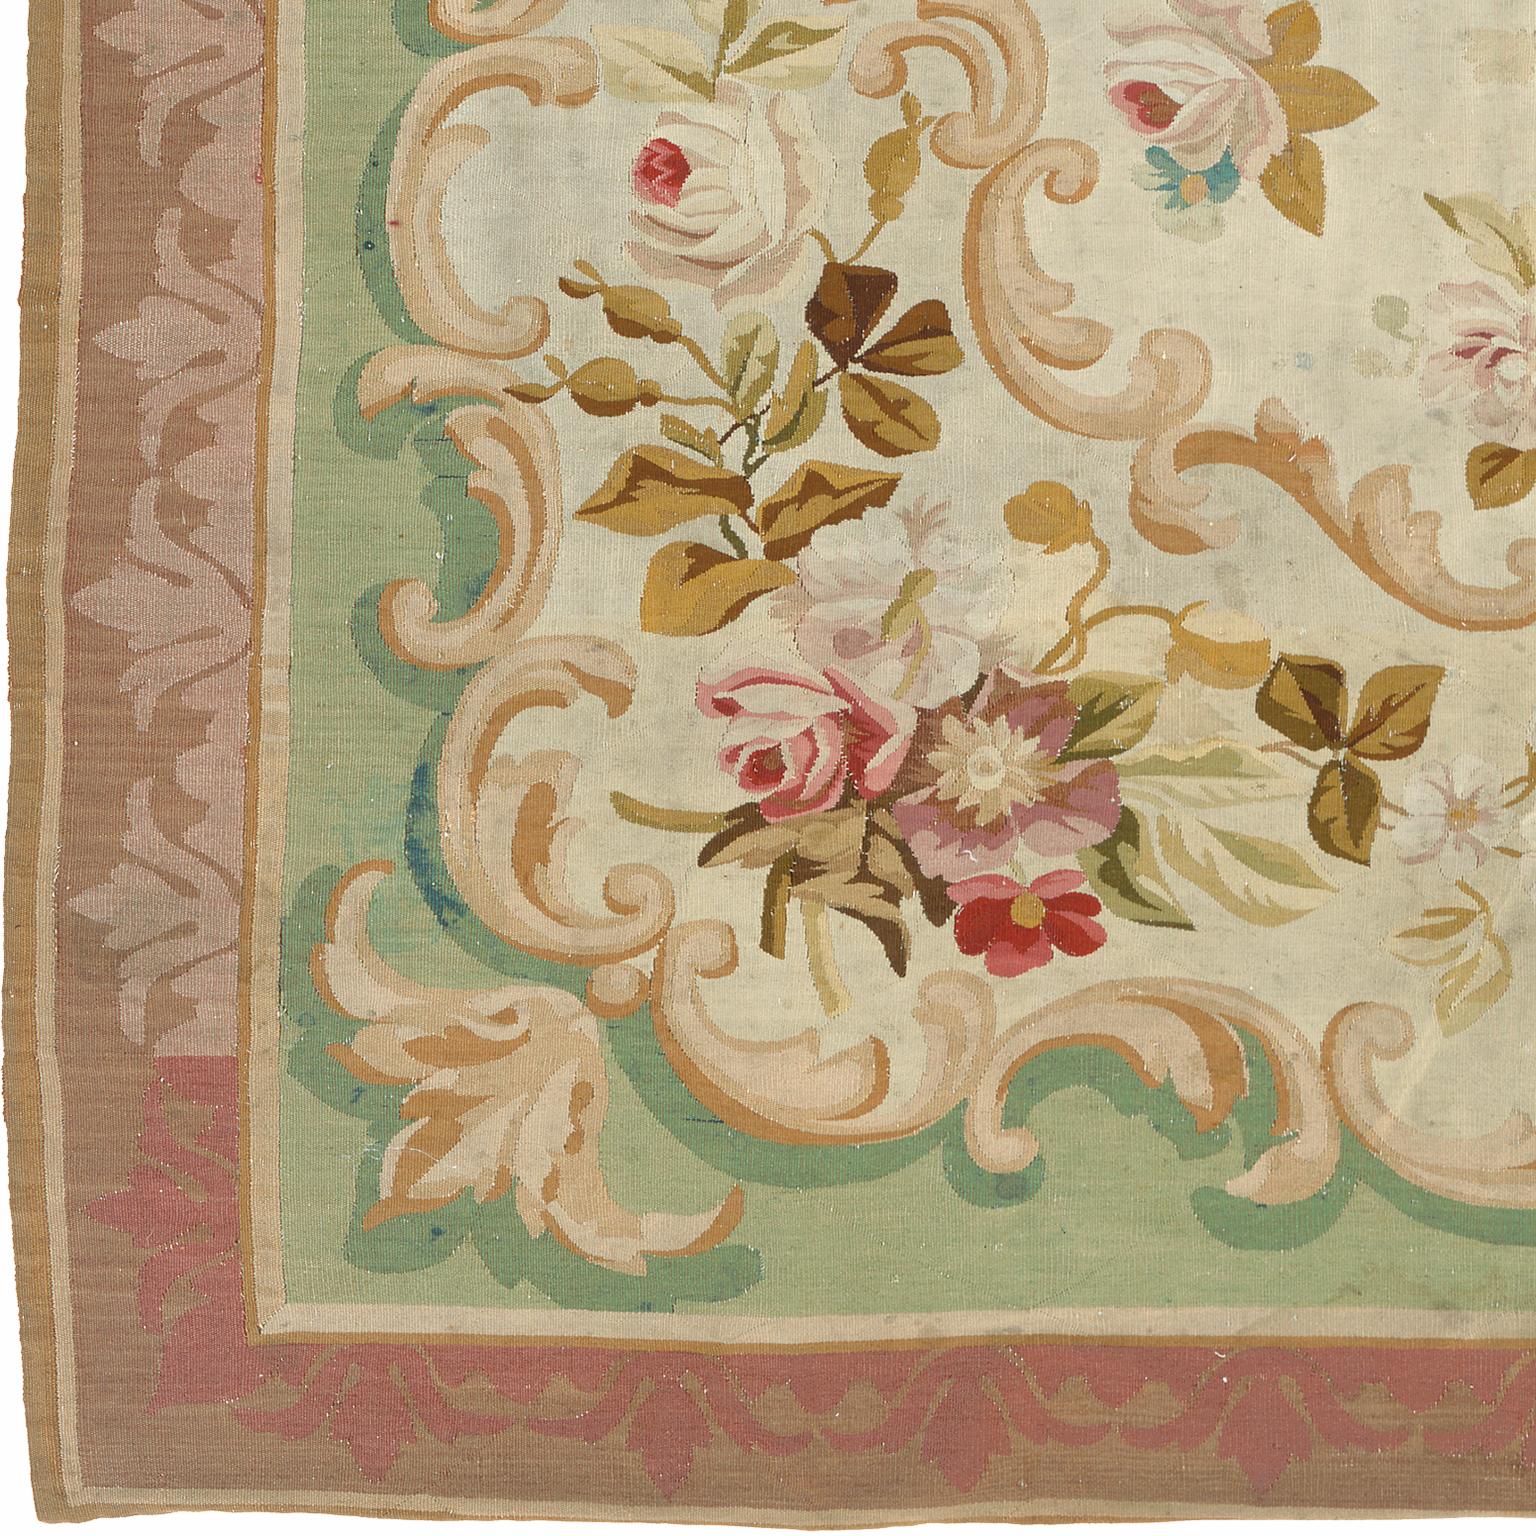 Antique French Aubusson rug
France, circa 1870
Handwoven.